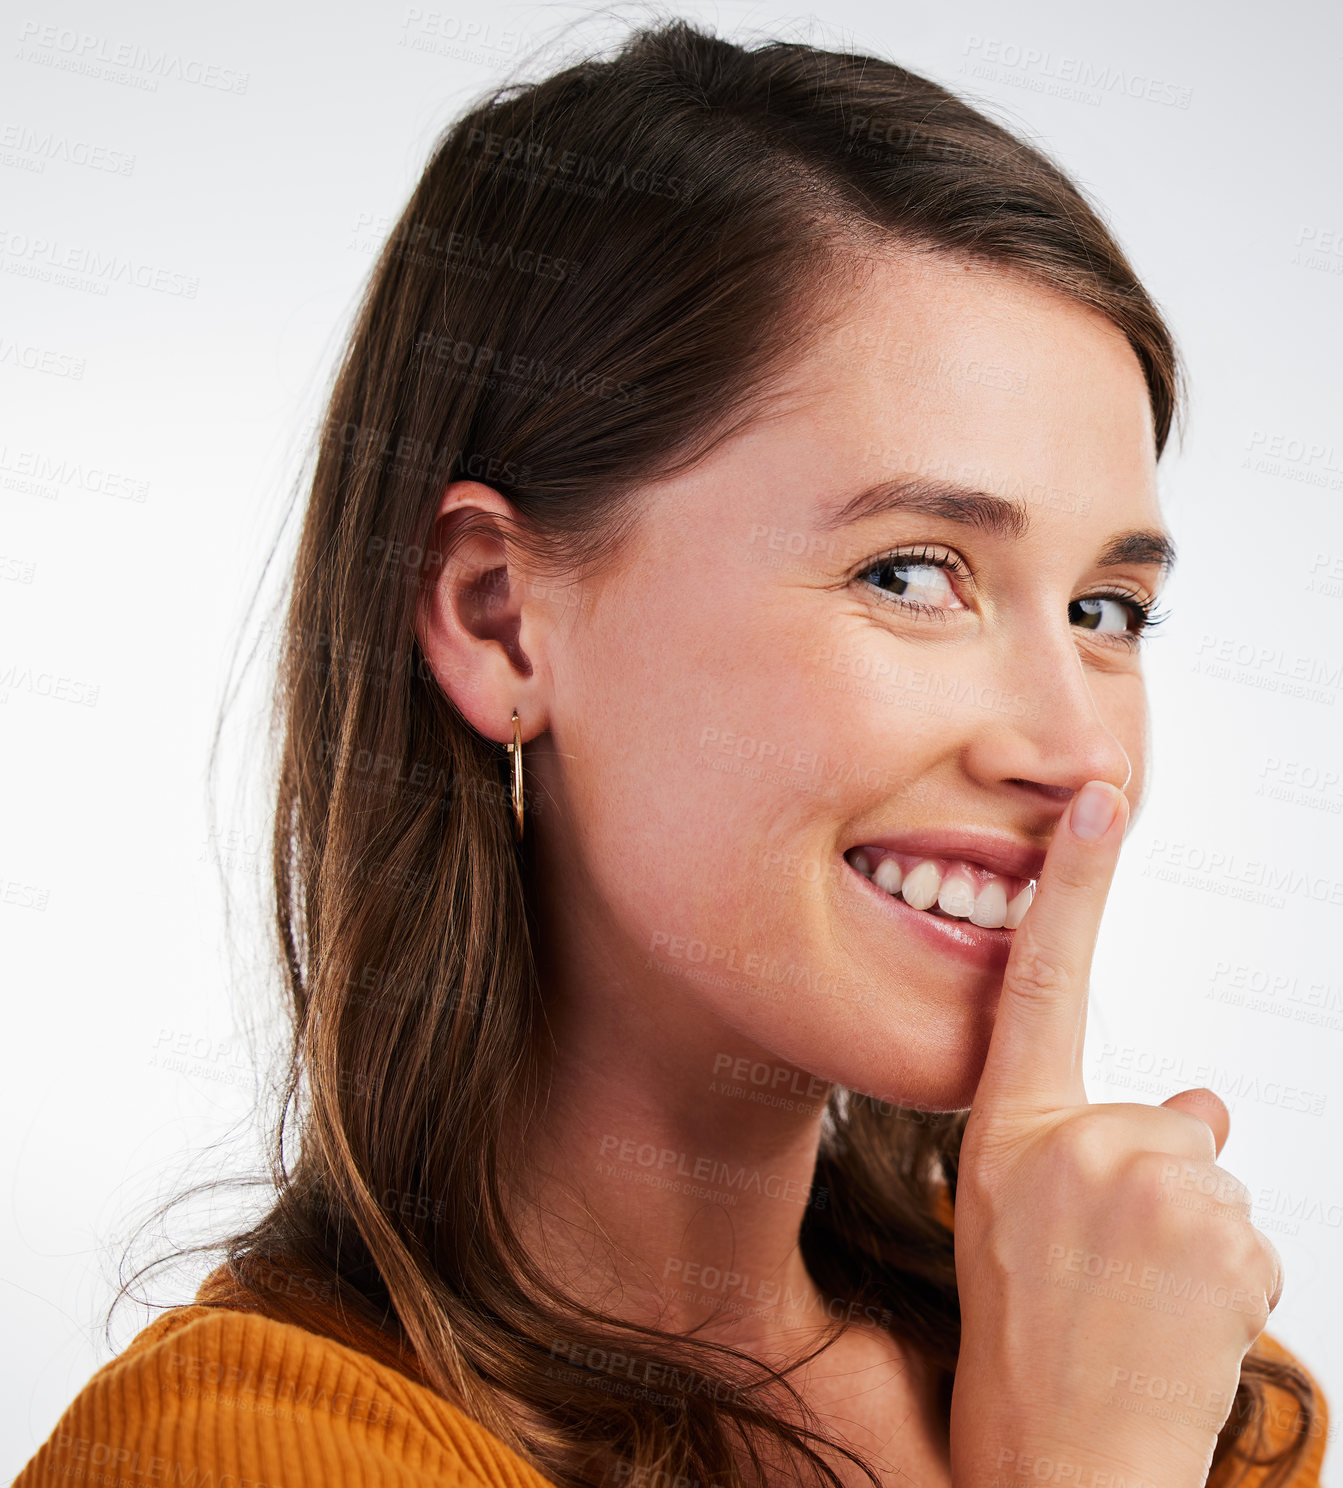 Buy stock photo Studio shot of a young woman smiling and signalling to be quiet against a background